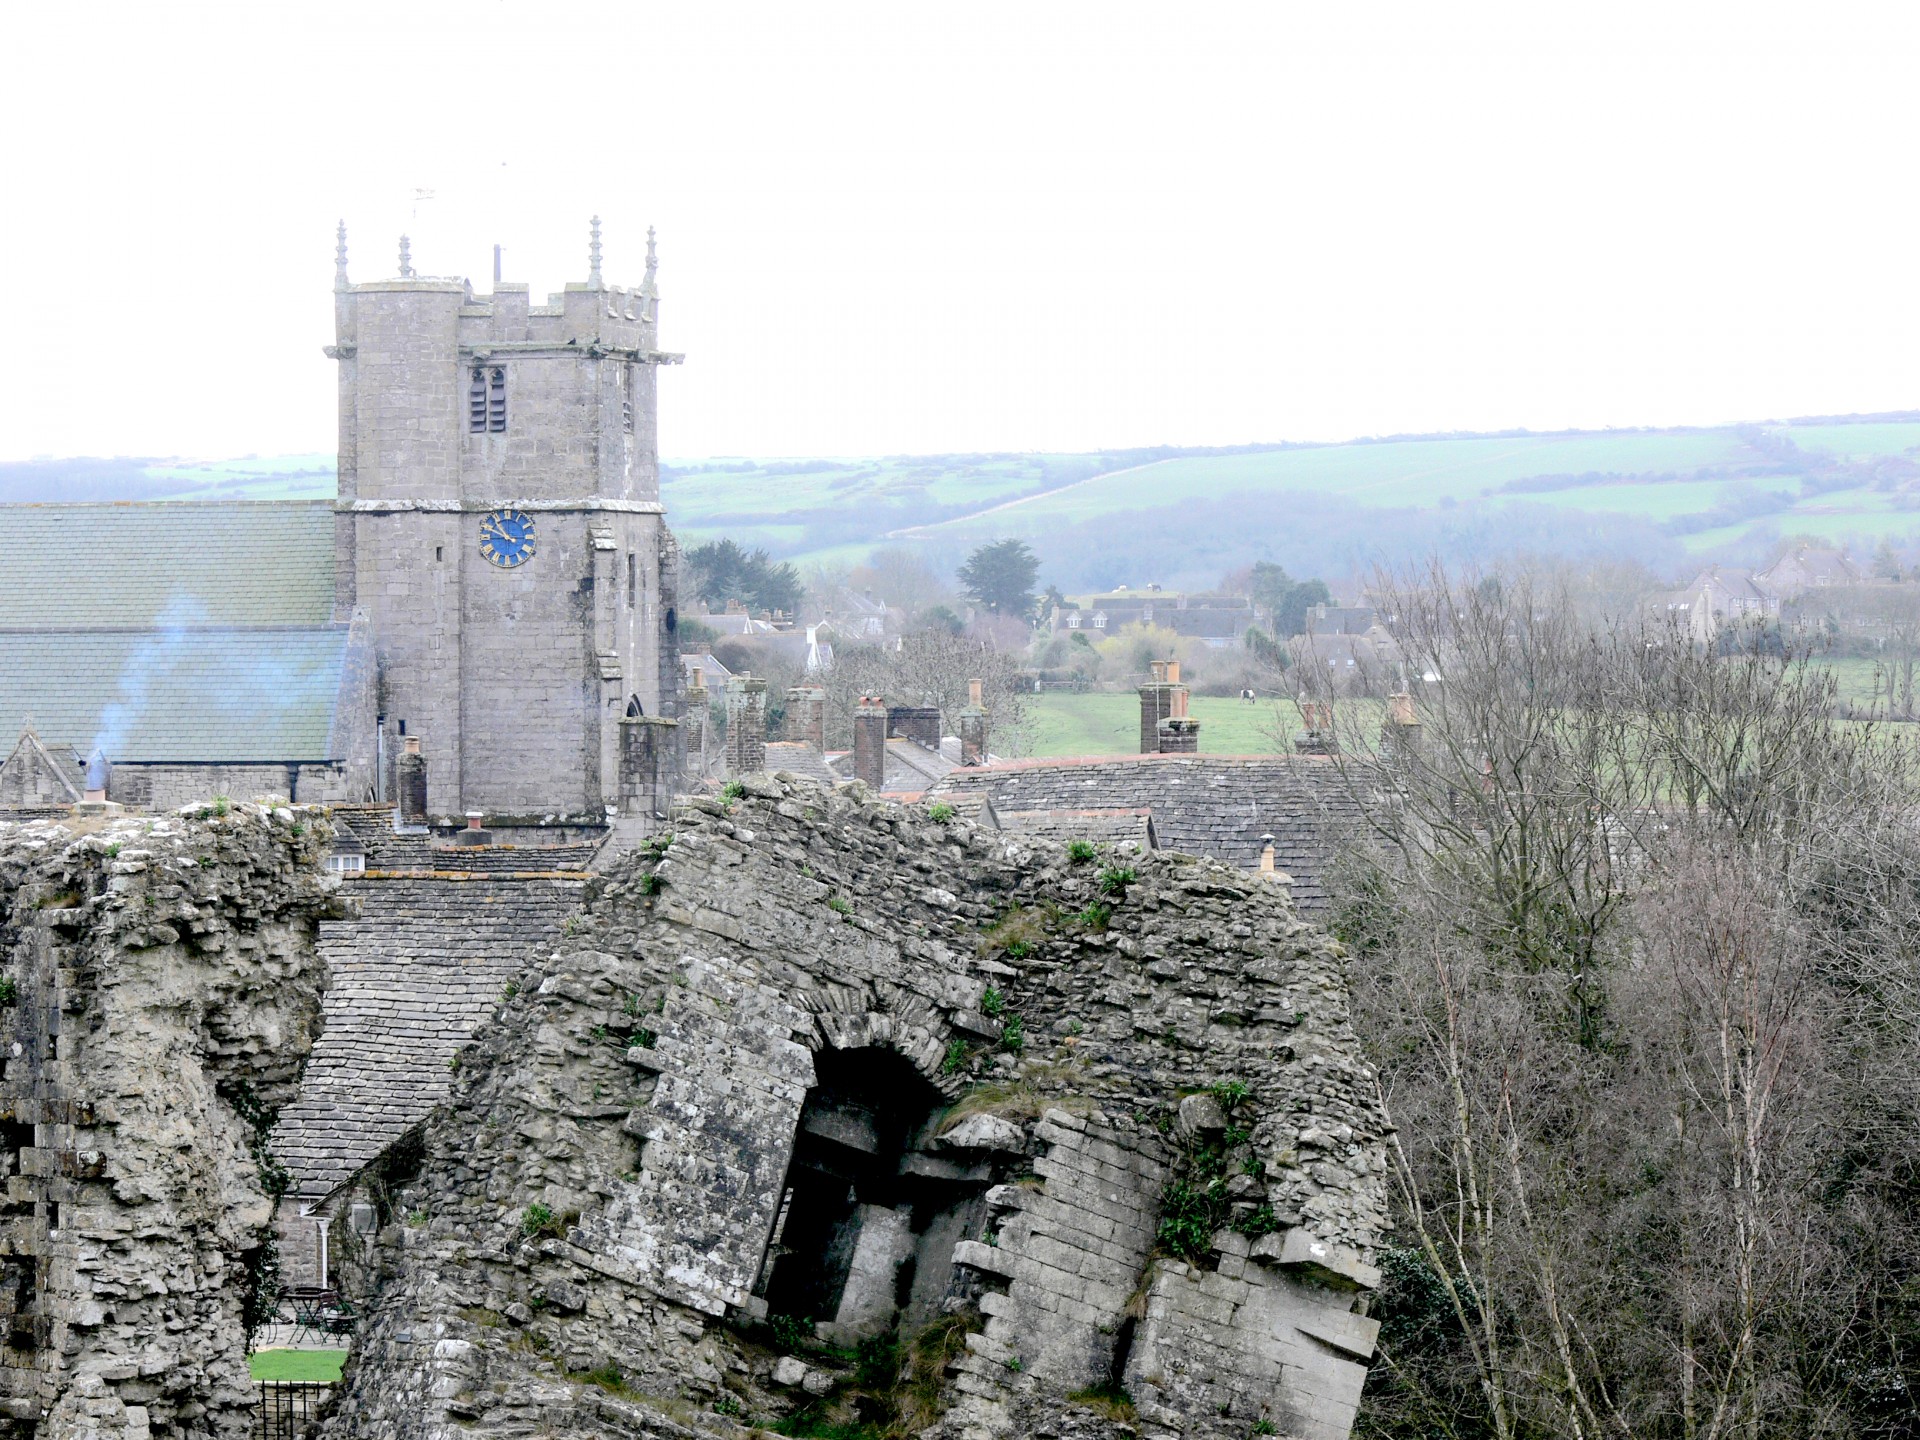 Looking over the broken castle wall towards the church in the village of Corfe